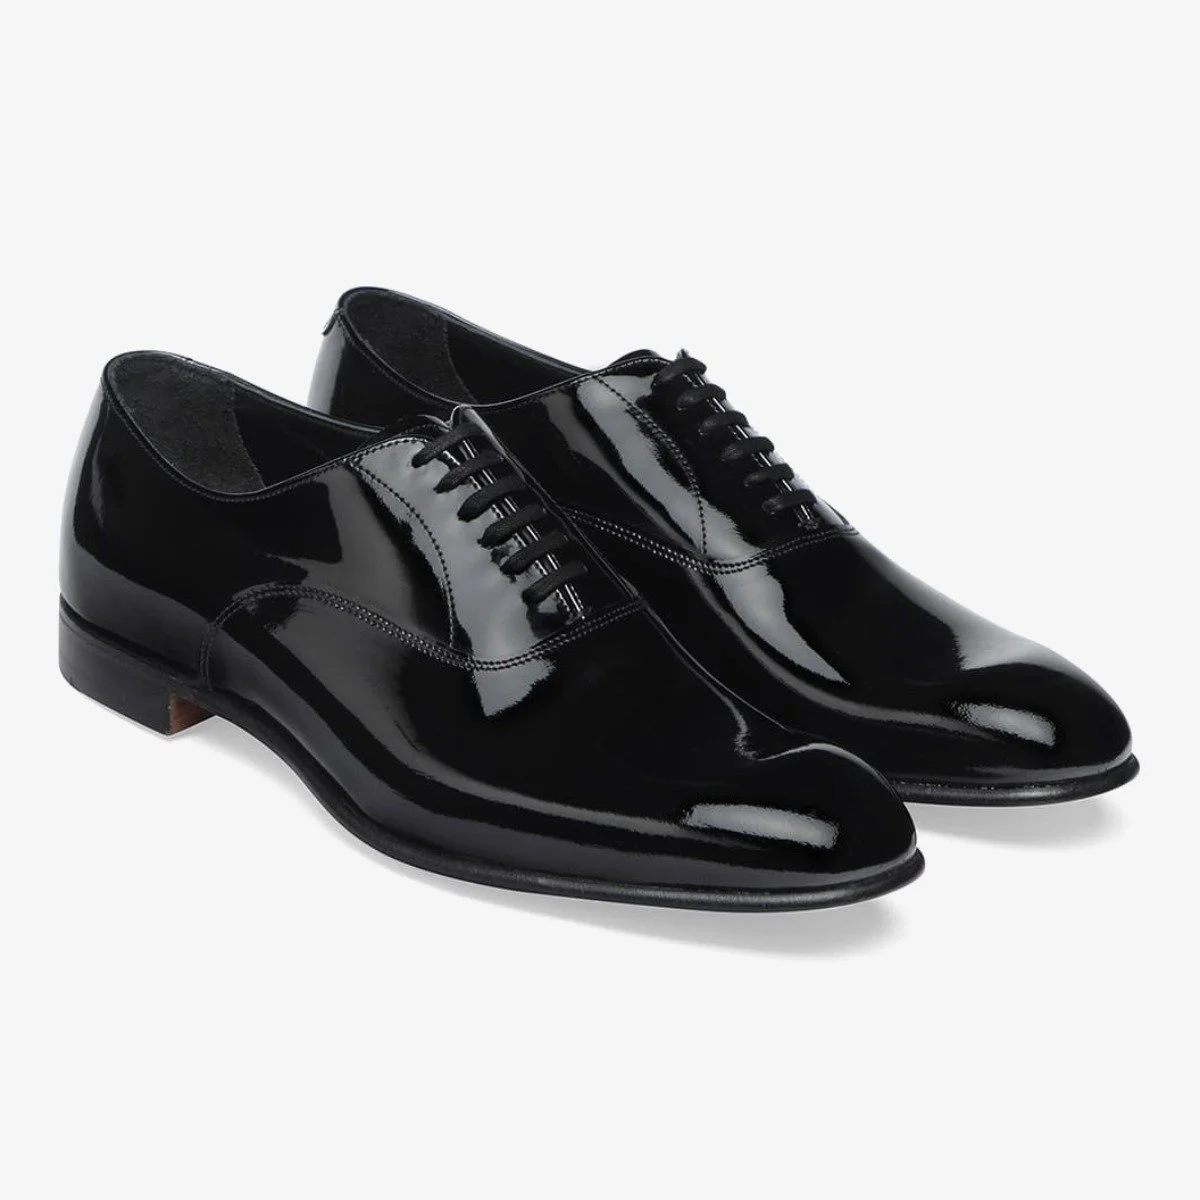 Cheaney Kelly black patent leather tuxedo oxford shoes